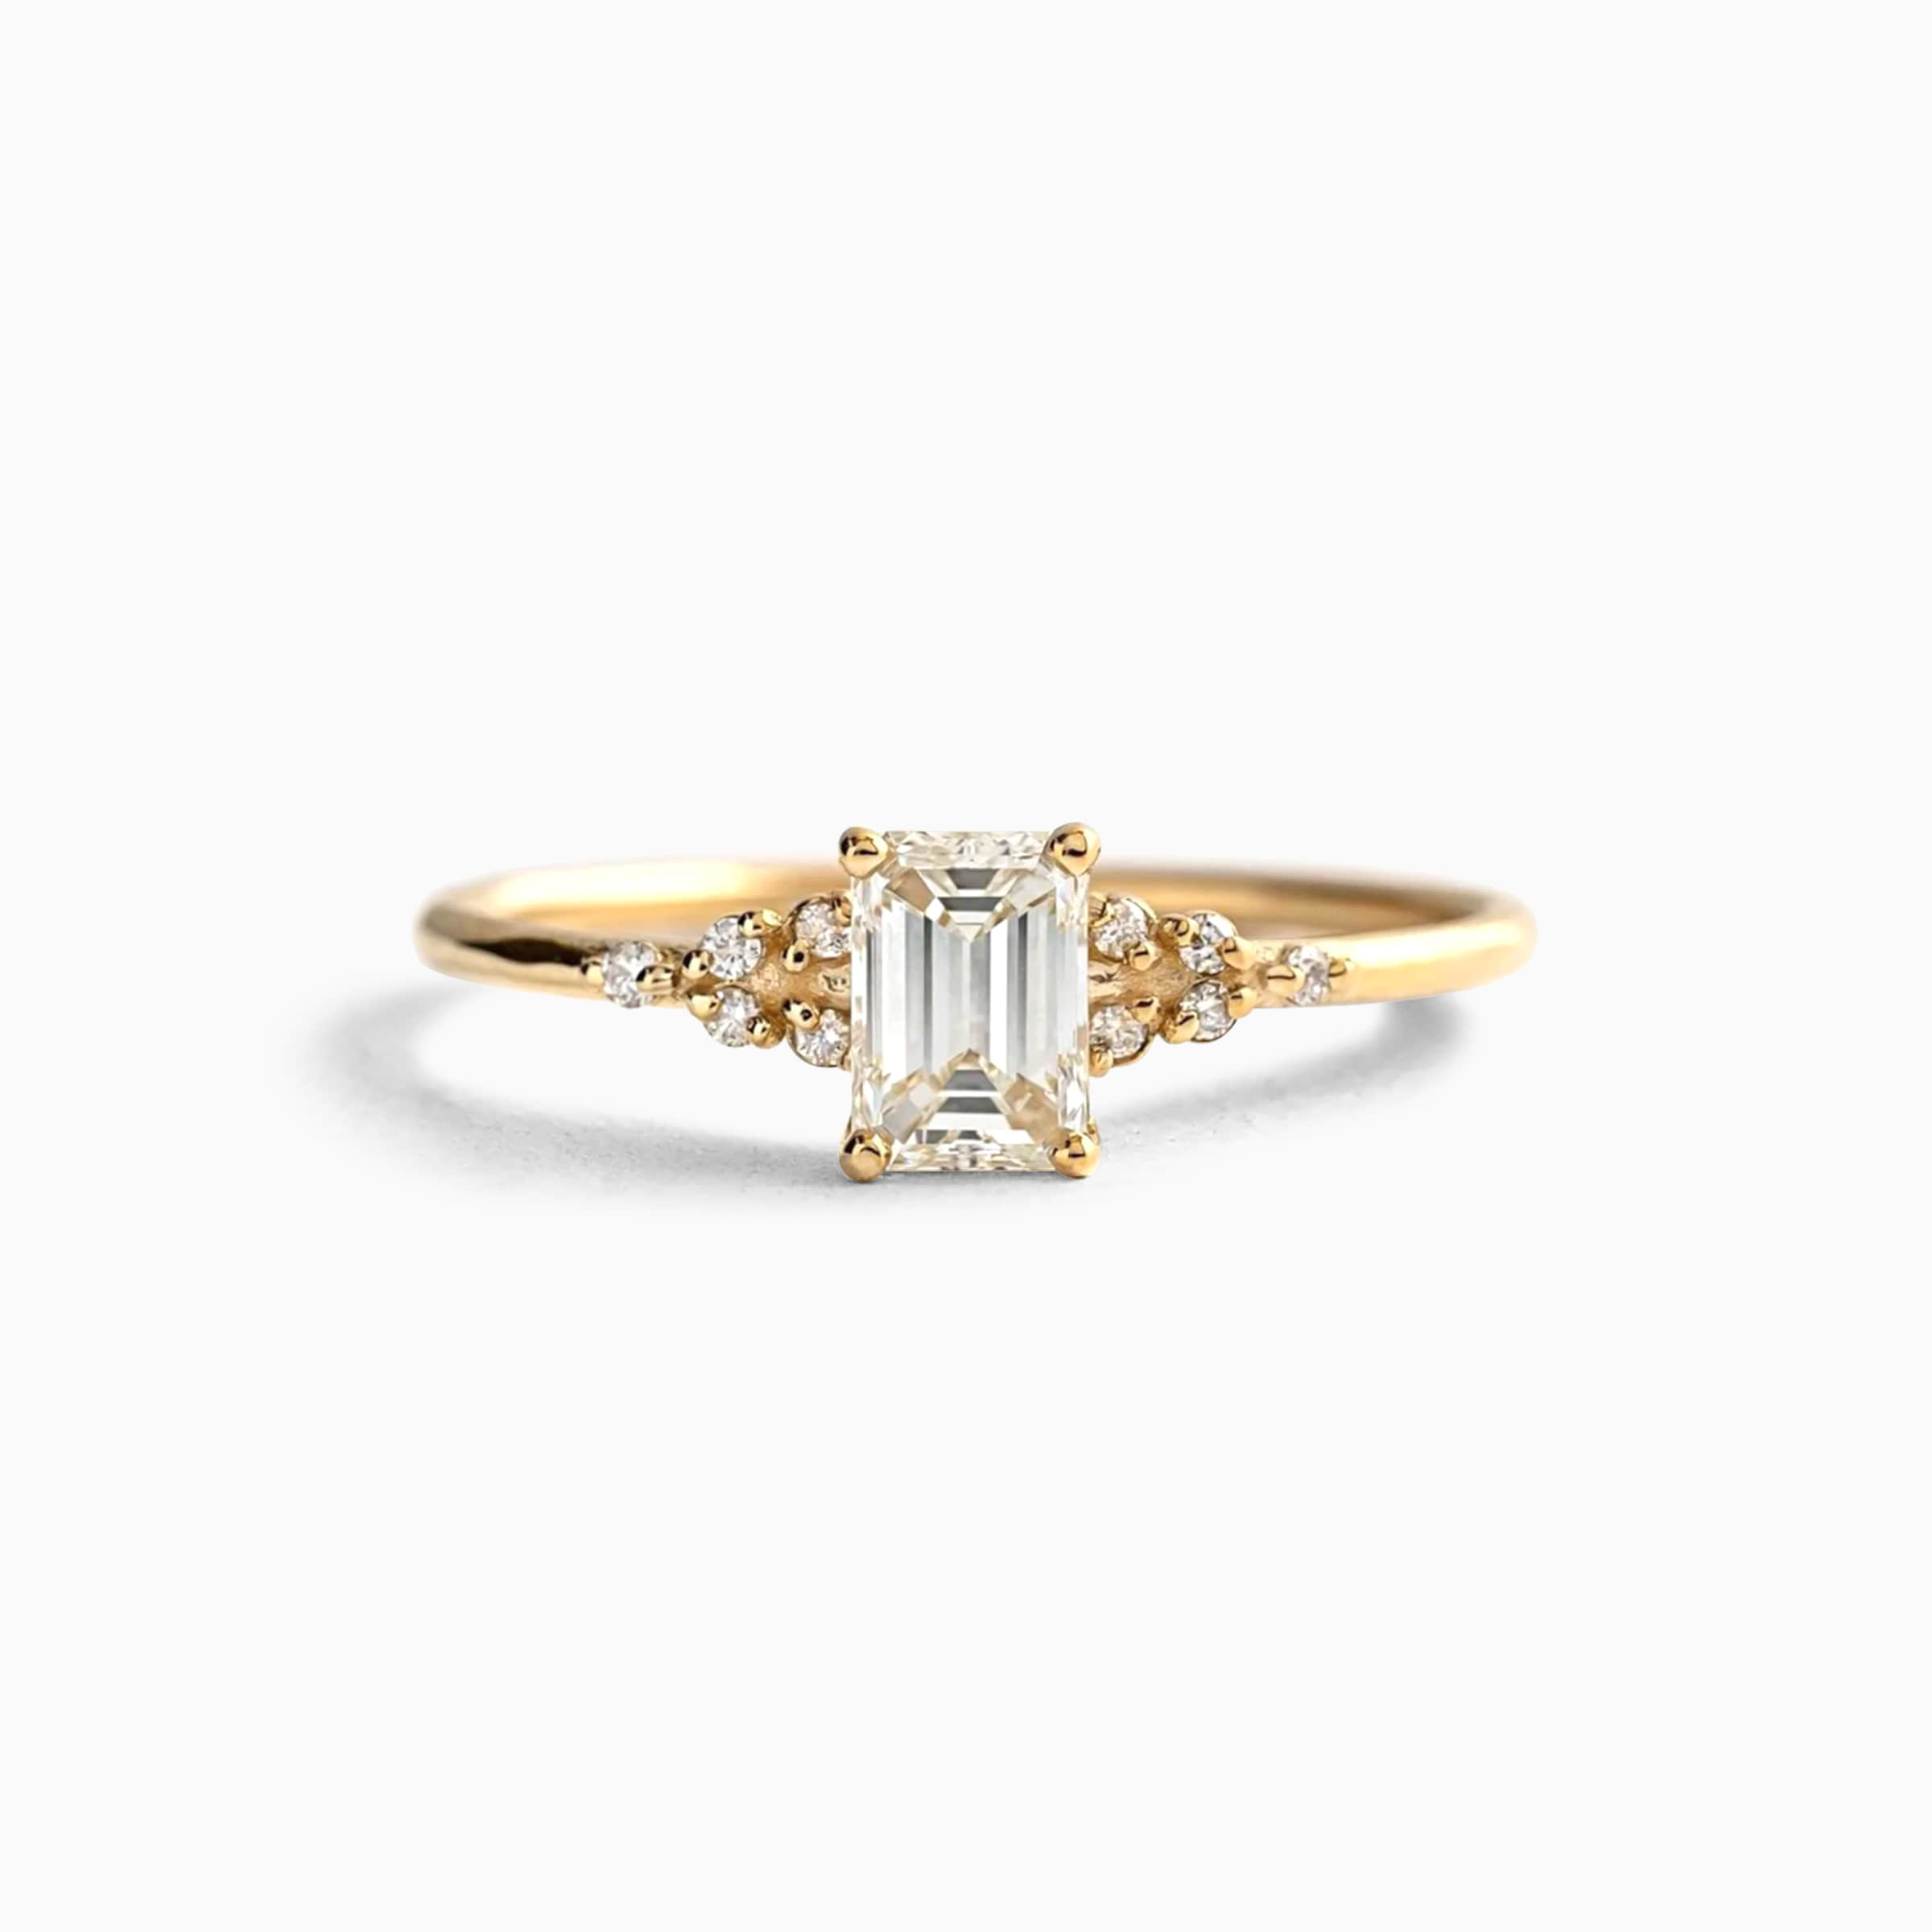 Darry Ring antiuqe emerald cut engagement ring in yellow gold